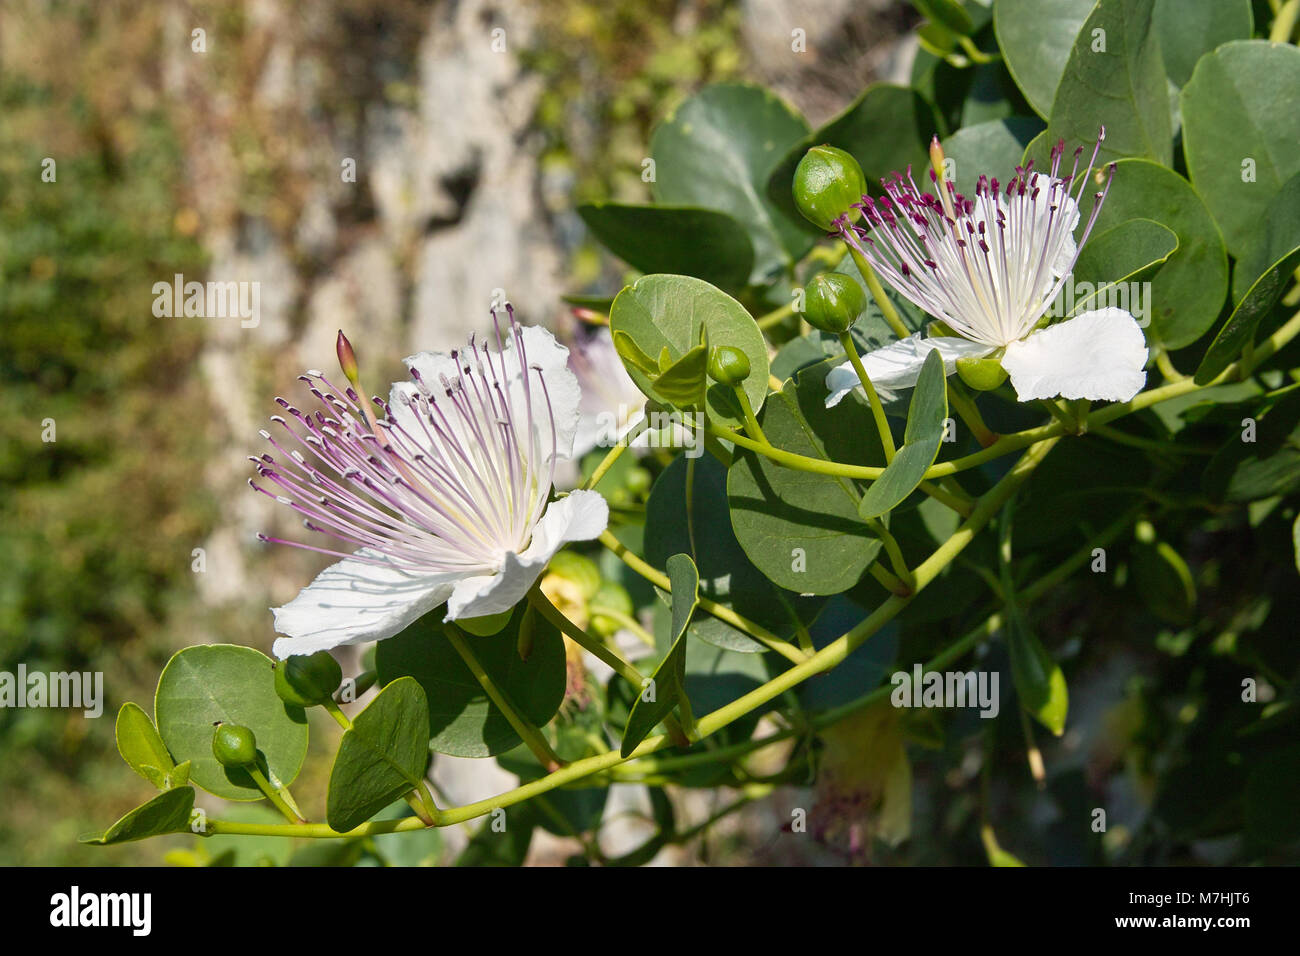 flowers and buds of caper plant, Capparis spinosa, Capparaceae Stock Photo